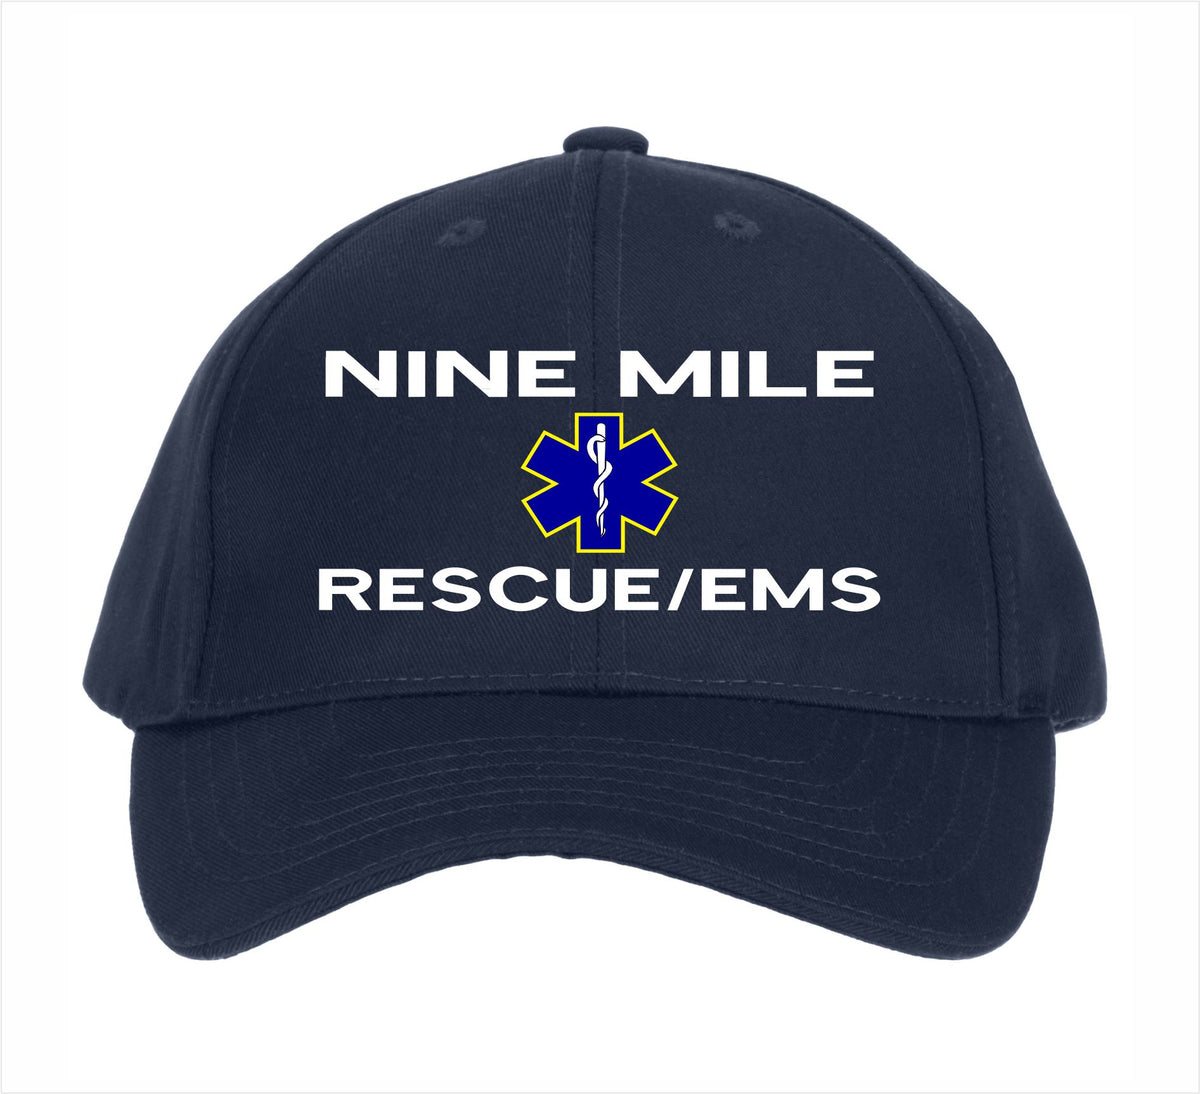 Nine Mile Rescue/EMS Embroidered Hat